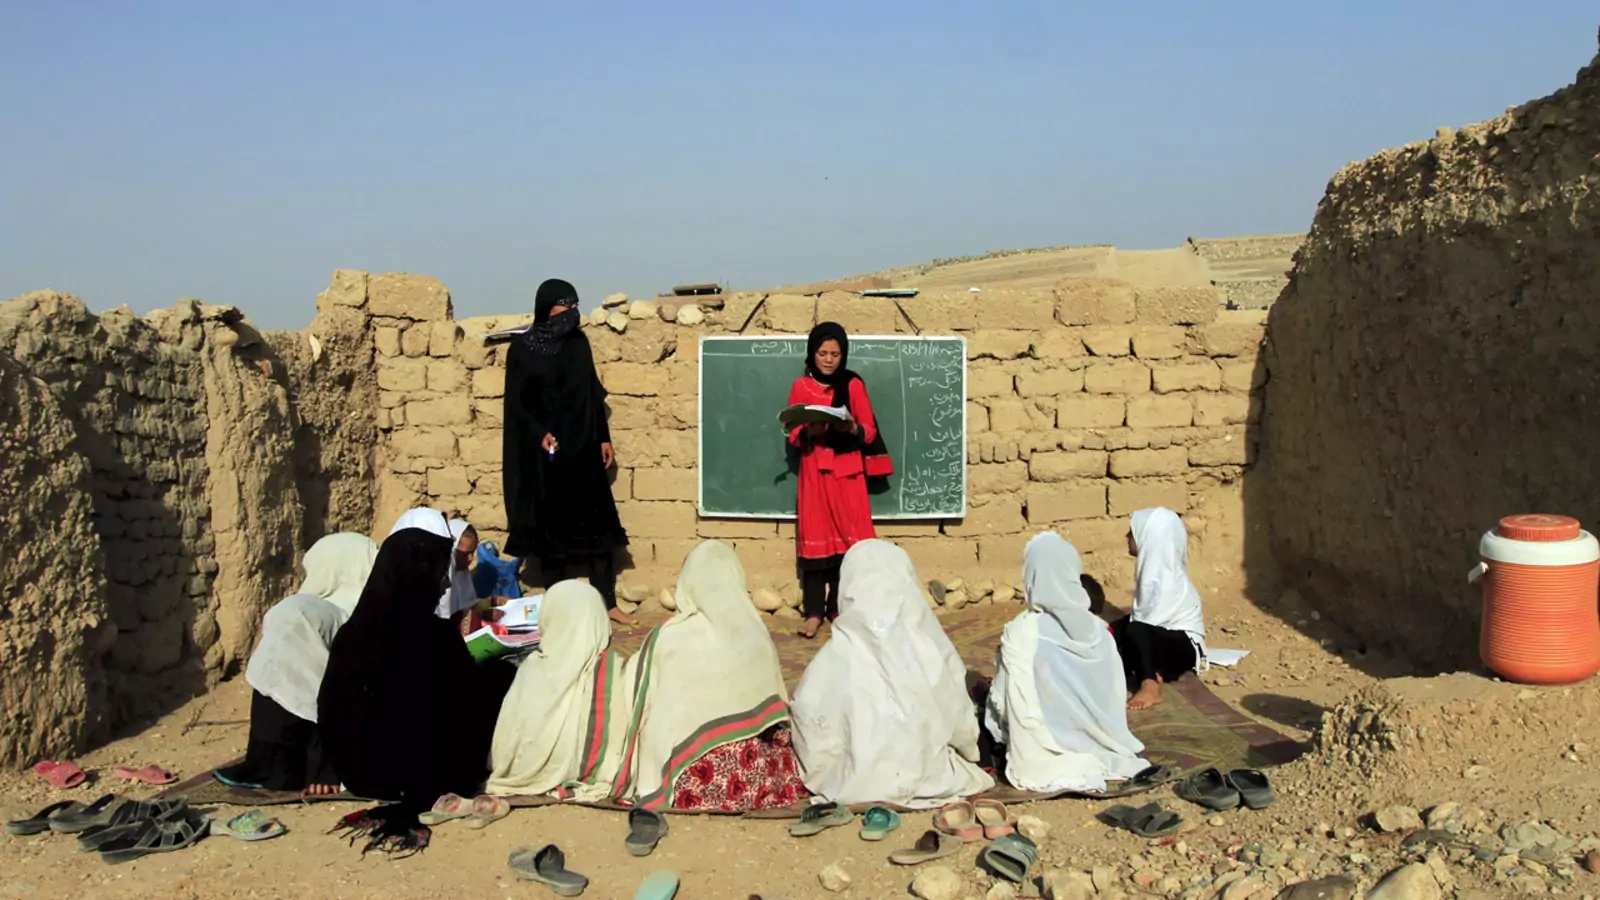 Afghan girls study at an open area, founded by Bangladesh Rural Advancement Committee (BRAC), outside Jalalabad city, Afghanistan.